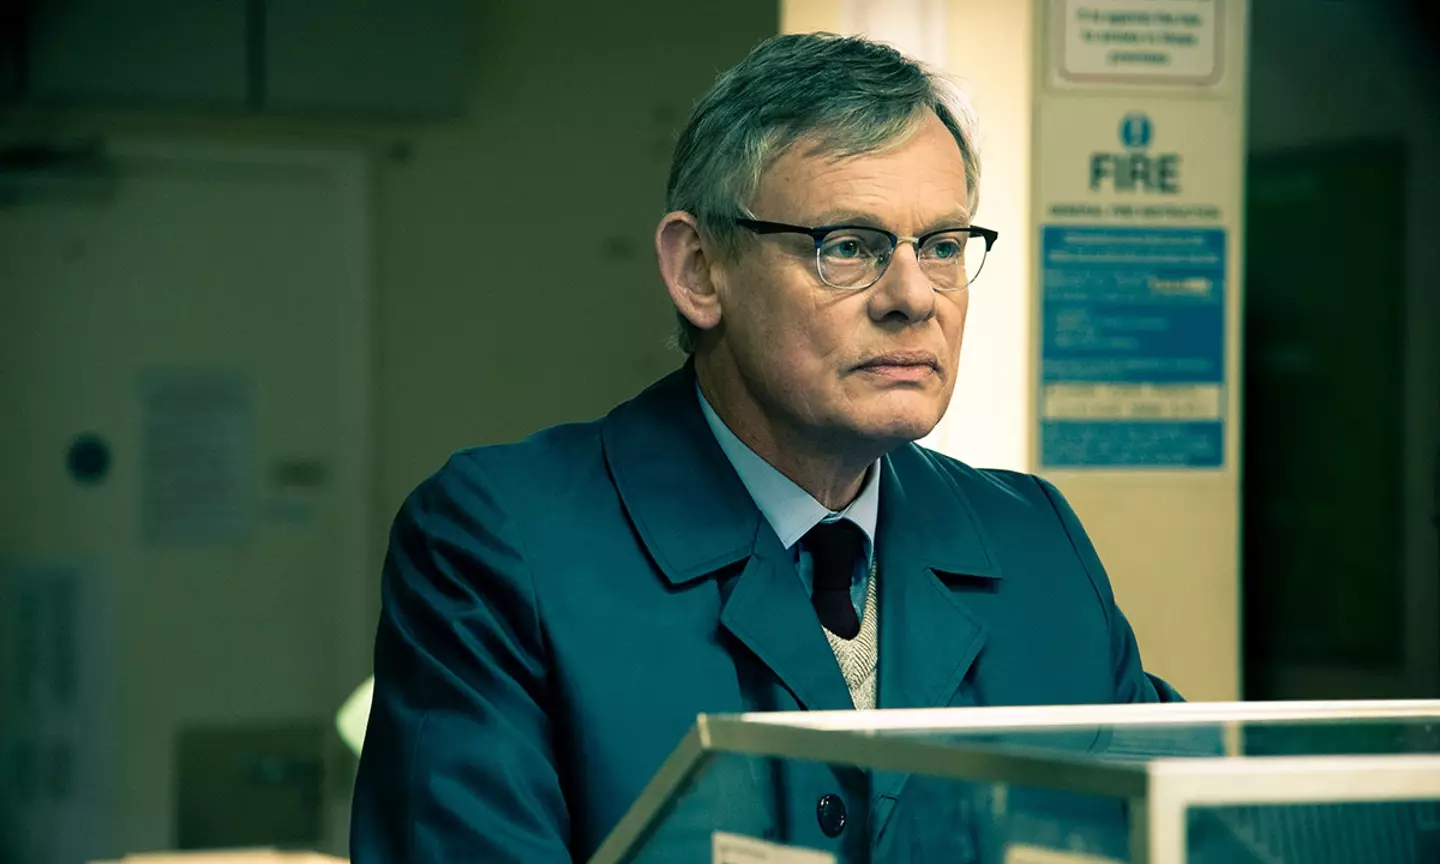 Martin Clunes plays a real life detective (